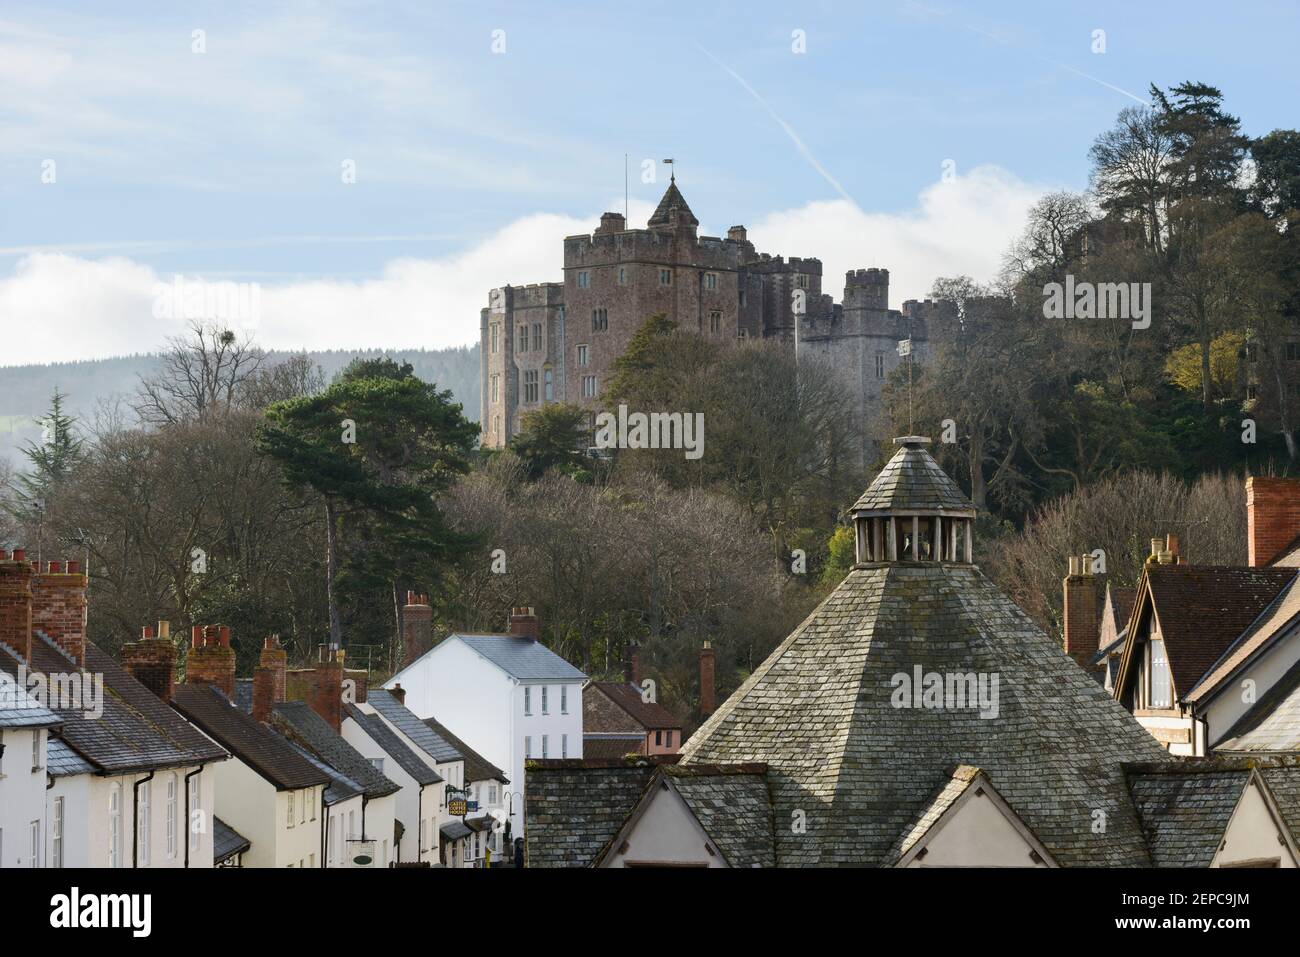 The roof of Dunster's Yarn Market with the castle in the background. Dunster, Somerset, UK. Stock Photo